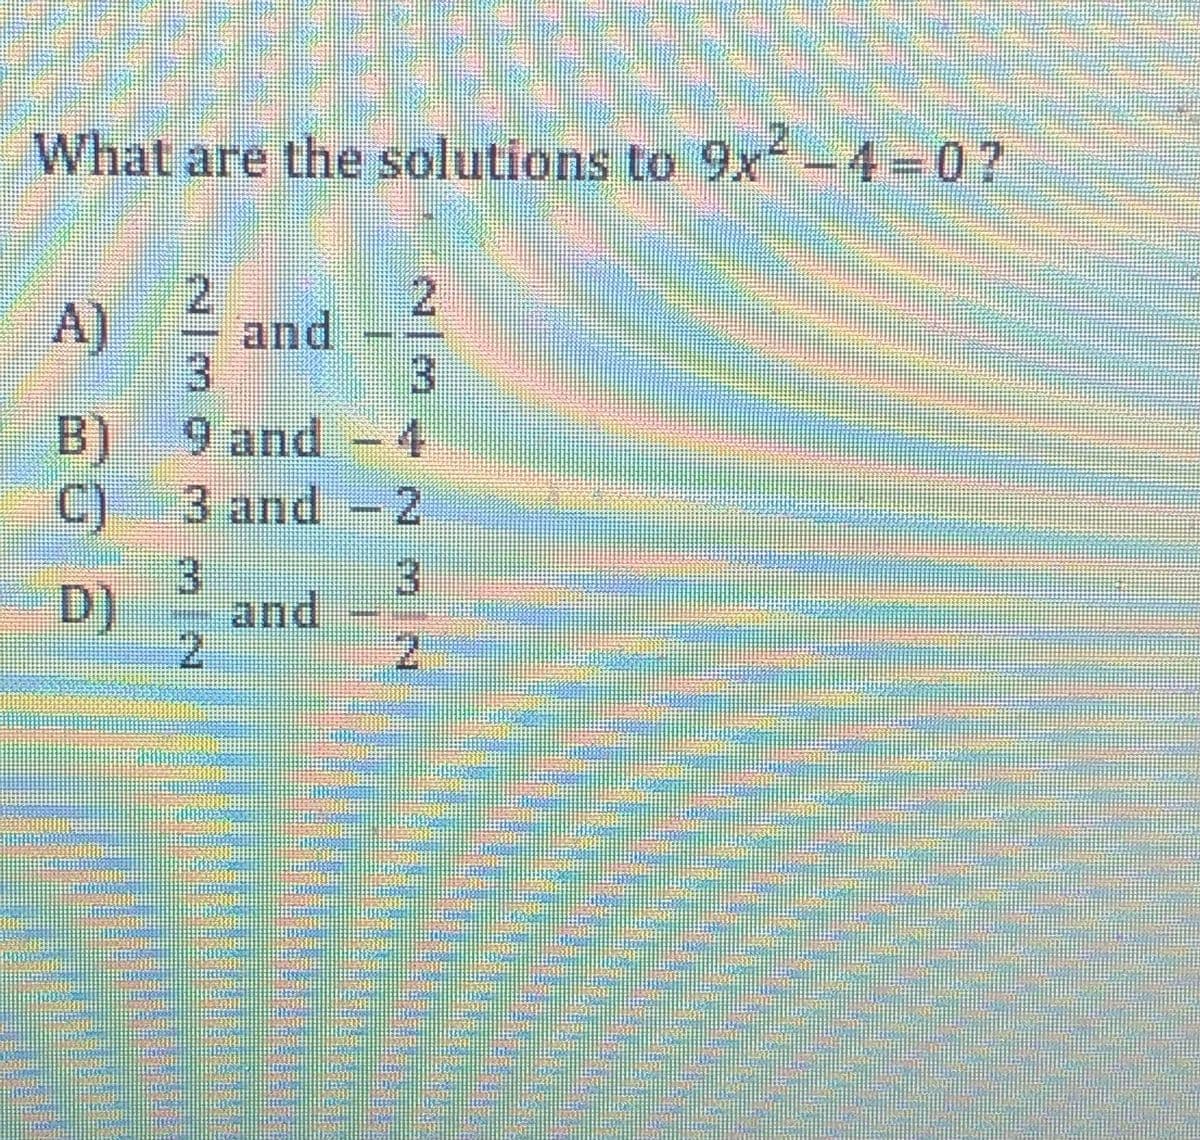 What are the solutions to 9x-4 0?
A).
and
3
9 and -4
C) 3 and - 2
B)
3
and
21
3.
D)
2
2/3
